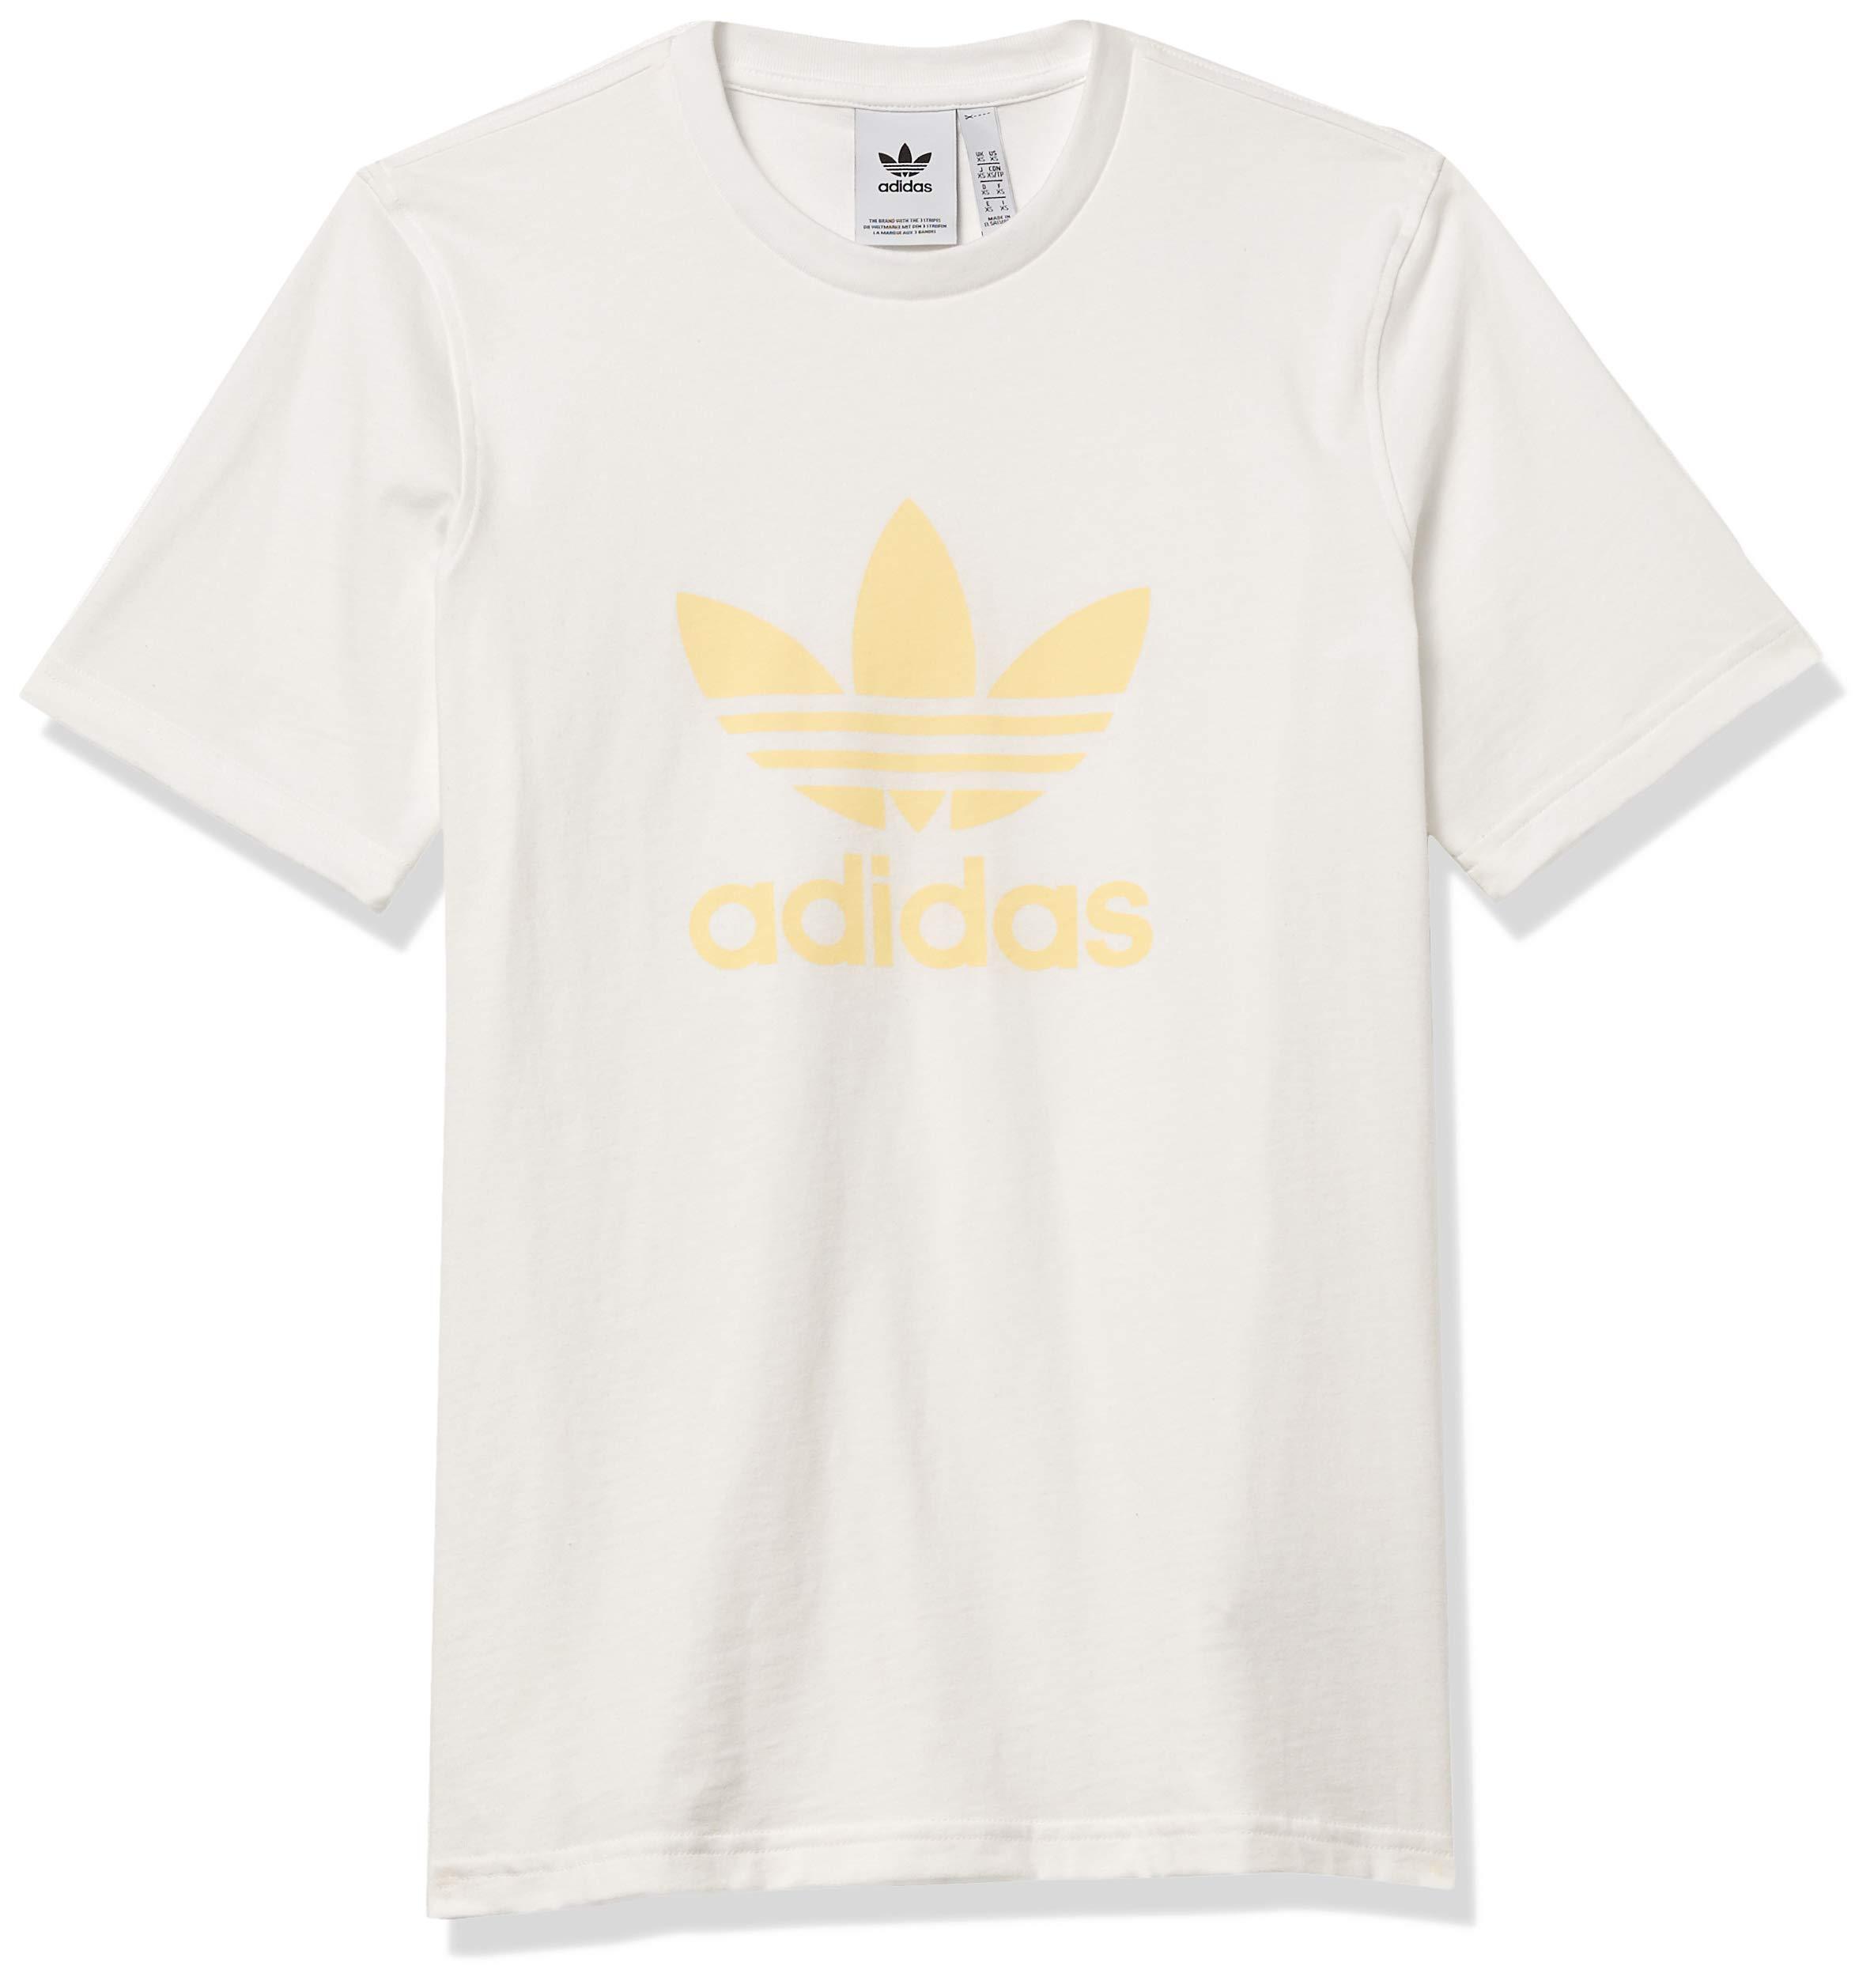 adidas Originals Trefoil T-shirt White/easy Yellow Small for Men - Save 24%  - Lyst